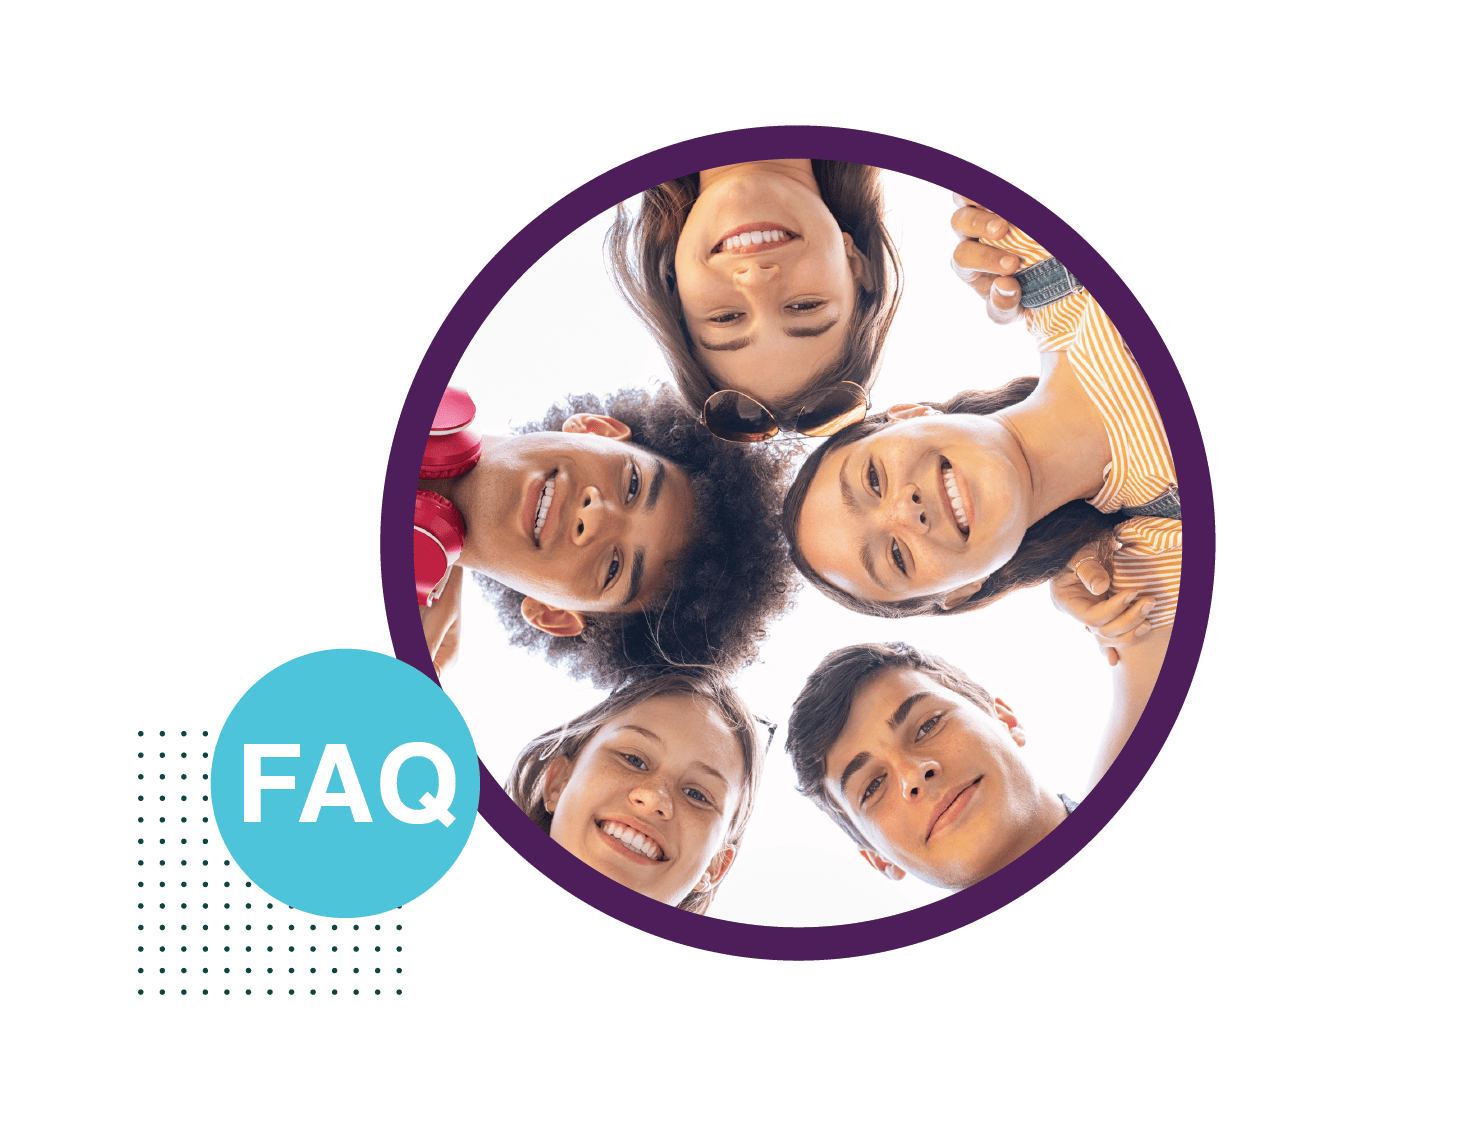 FAQ - Students in a circle smiling